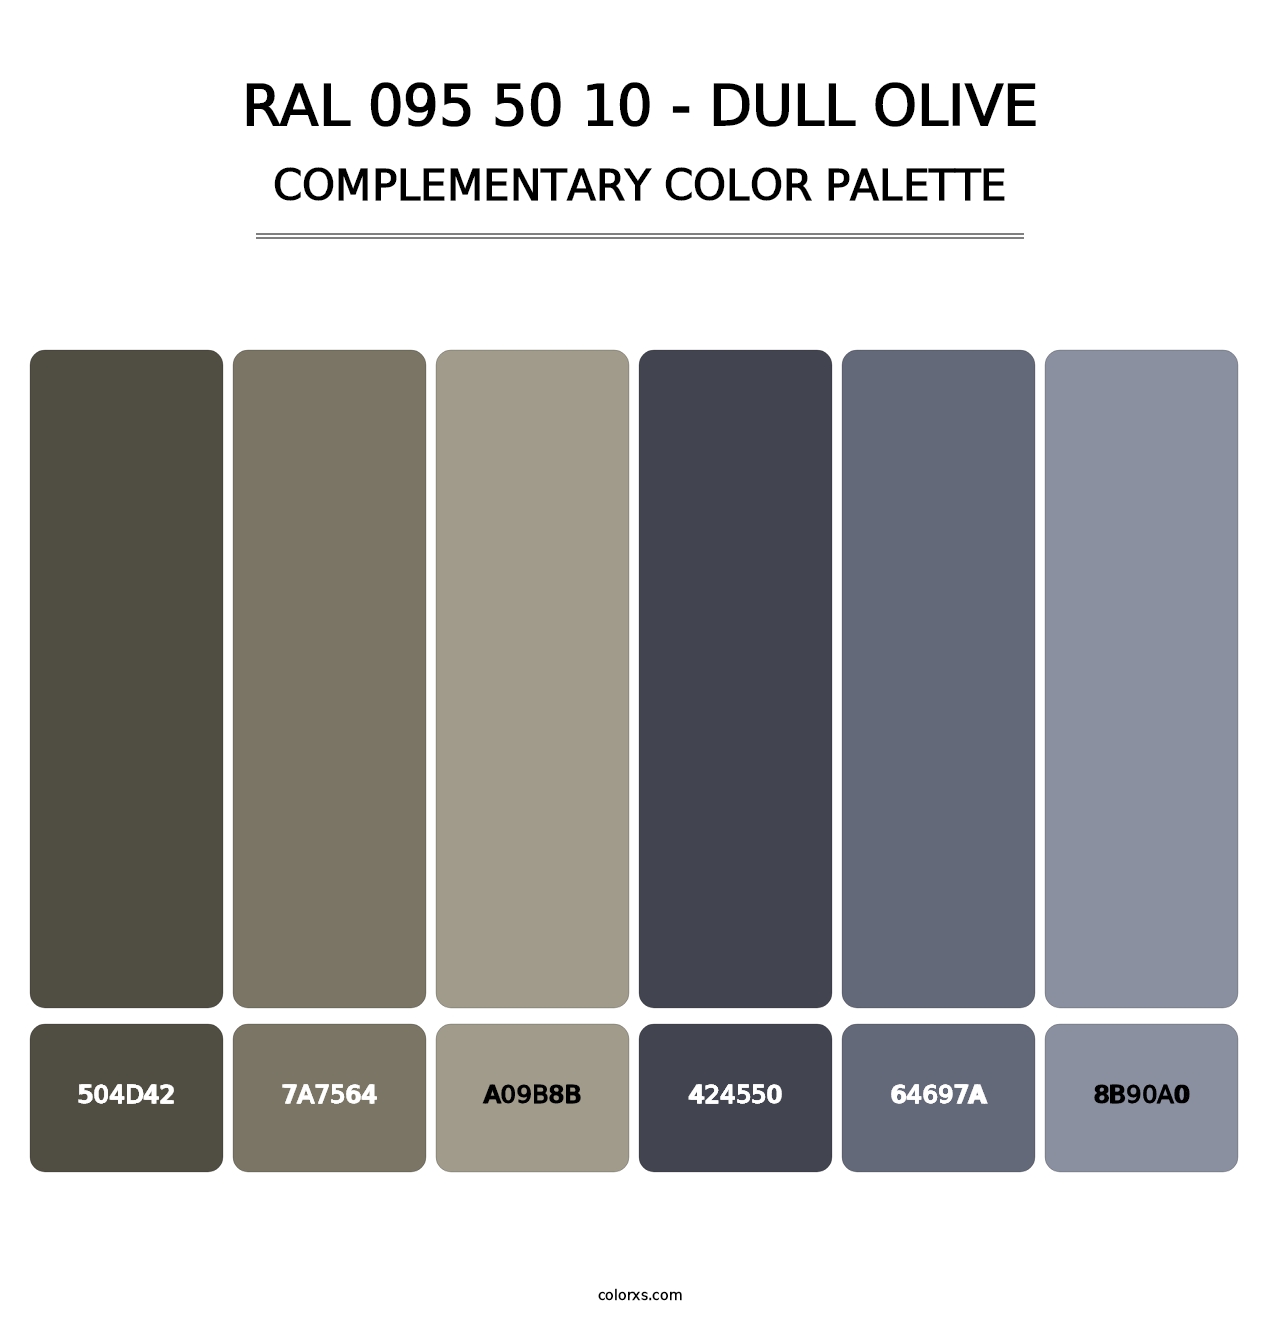 RAL 095 50 10 - Dull Olive - Complementary Color Palette